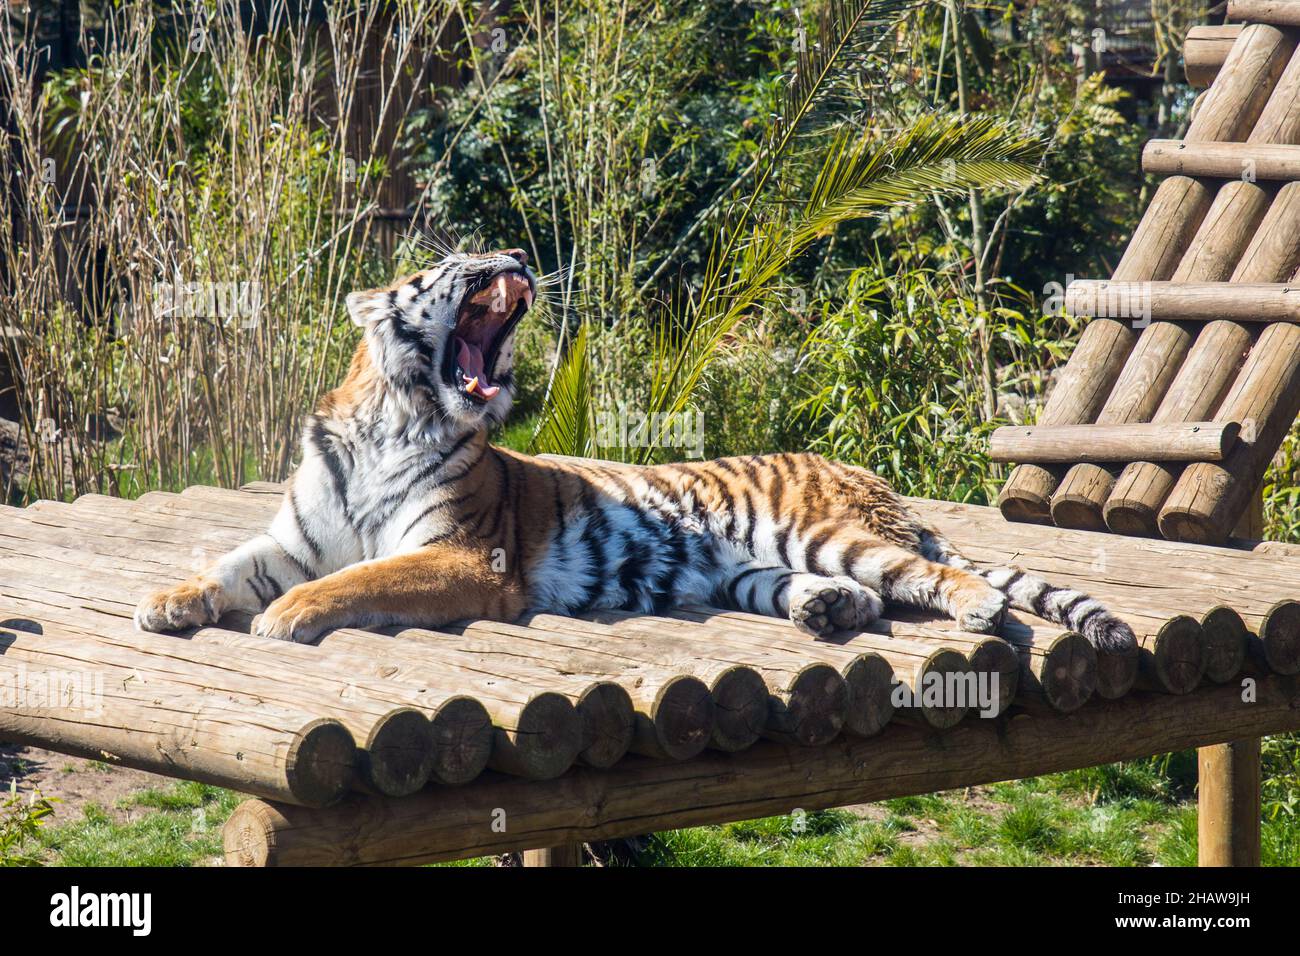 Big tiger with open mouth lying on a wooden platform in the zoo Stock Photo